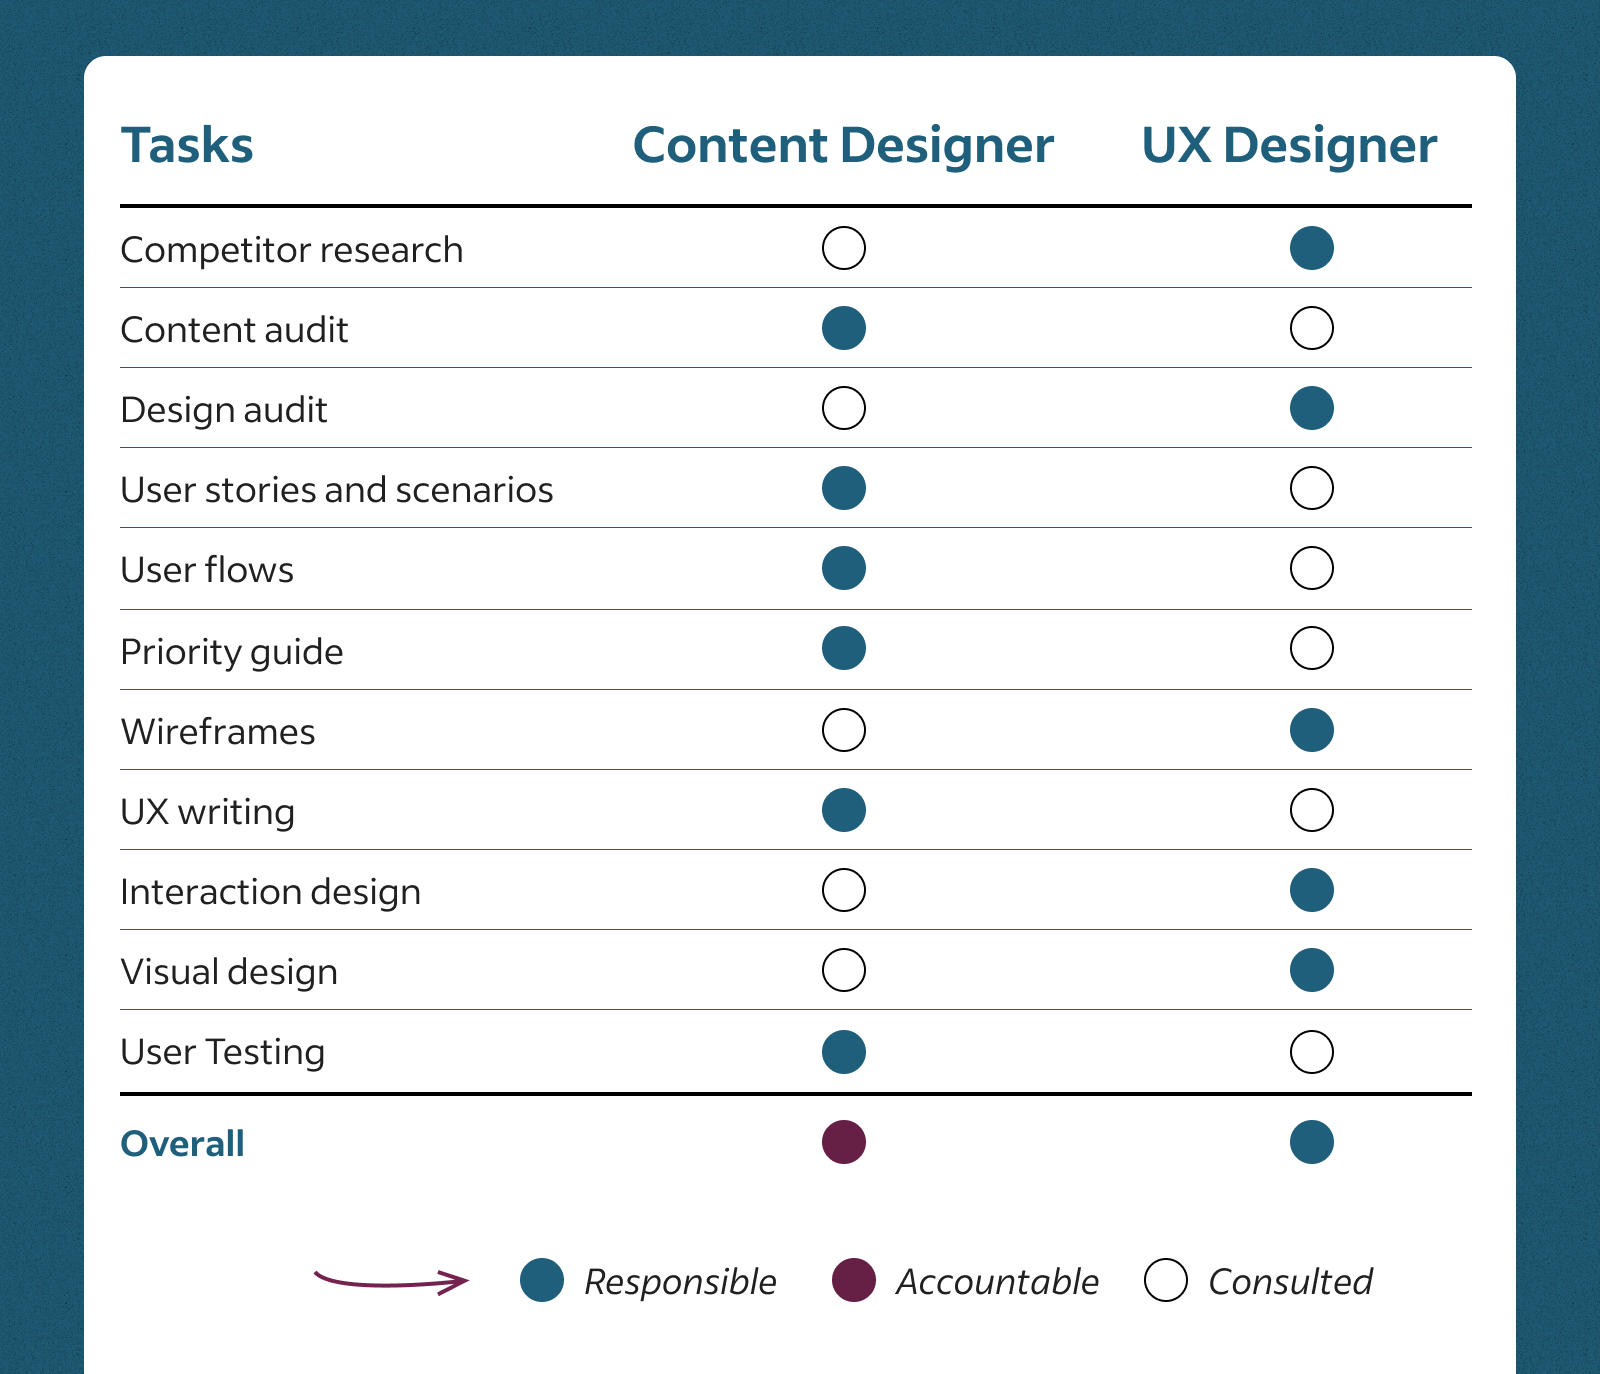 Diagram showing the distribution of UX design tasks following the RACI Framework, which defines who is Responsible, Accountable, Consulted and Informed for each task. The tasks are distributed between two columns which are labeled Content Designer and UX Designer.